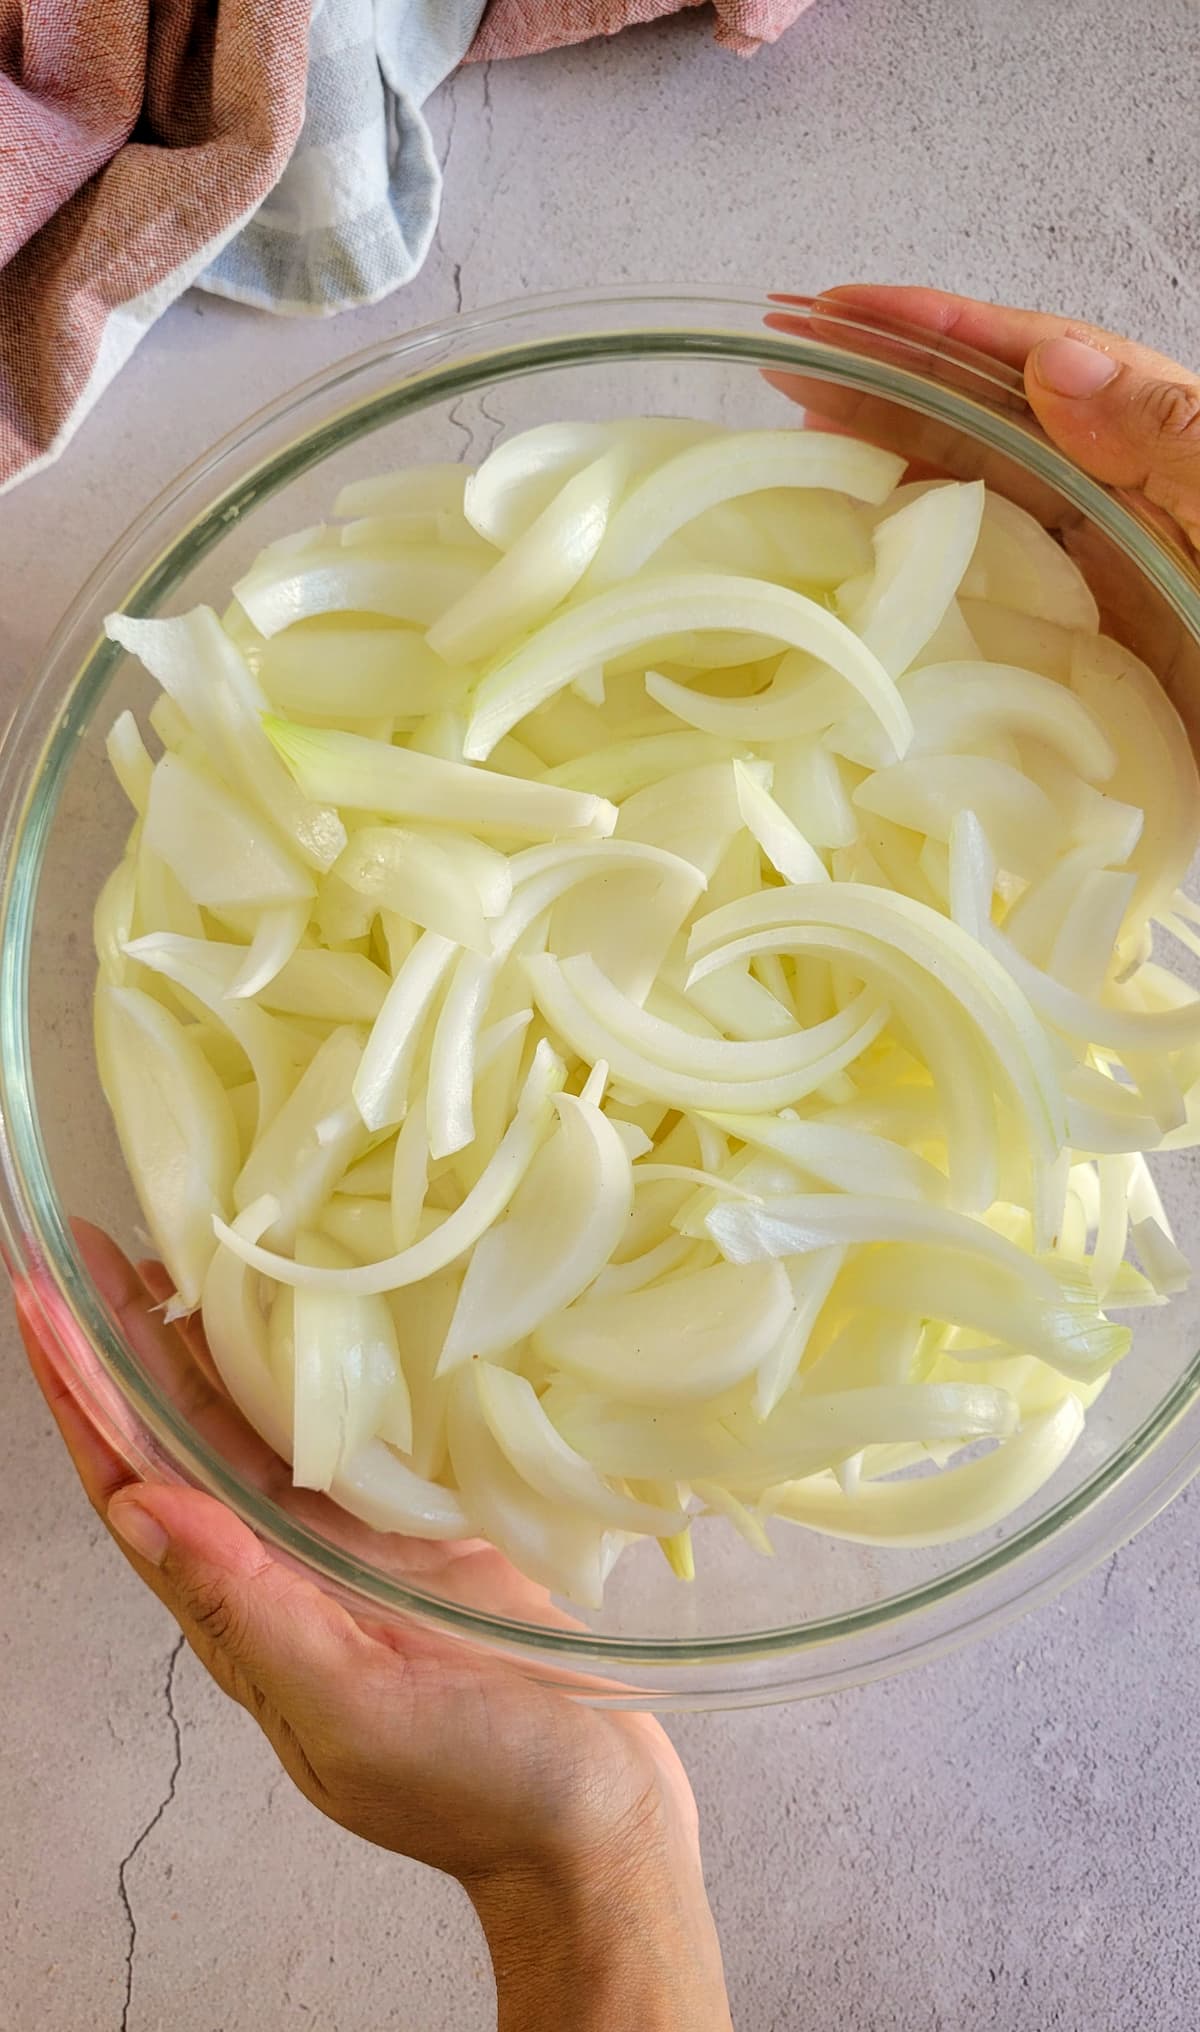 hands holding a bowl of sliced white onions